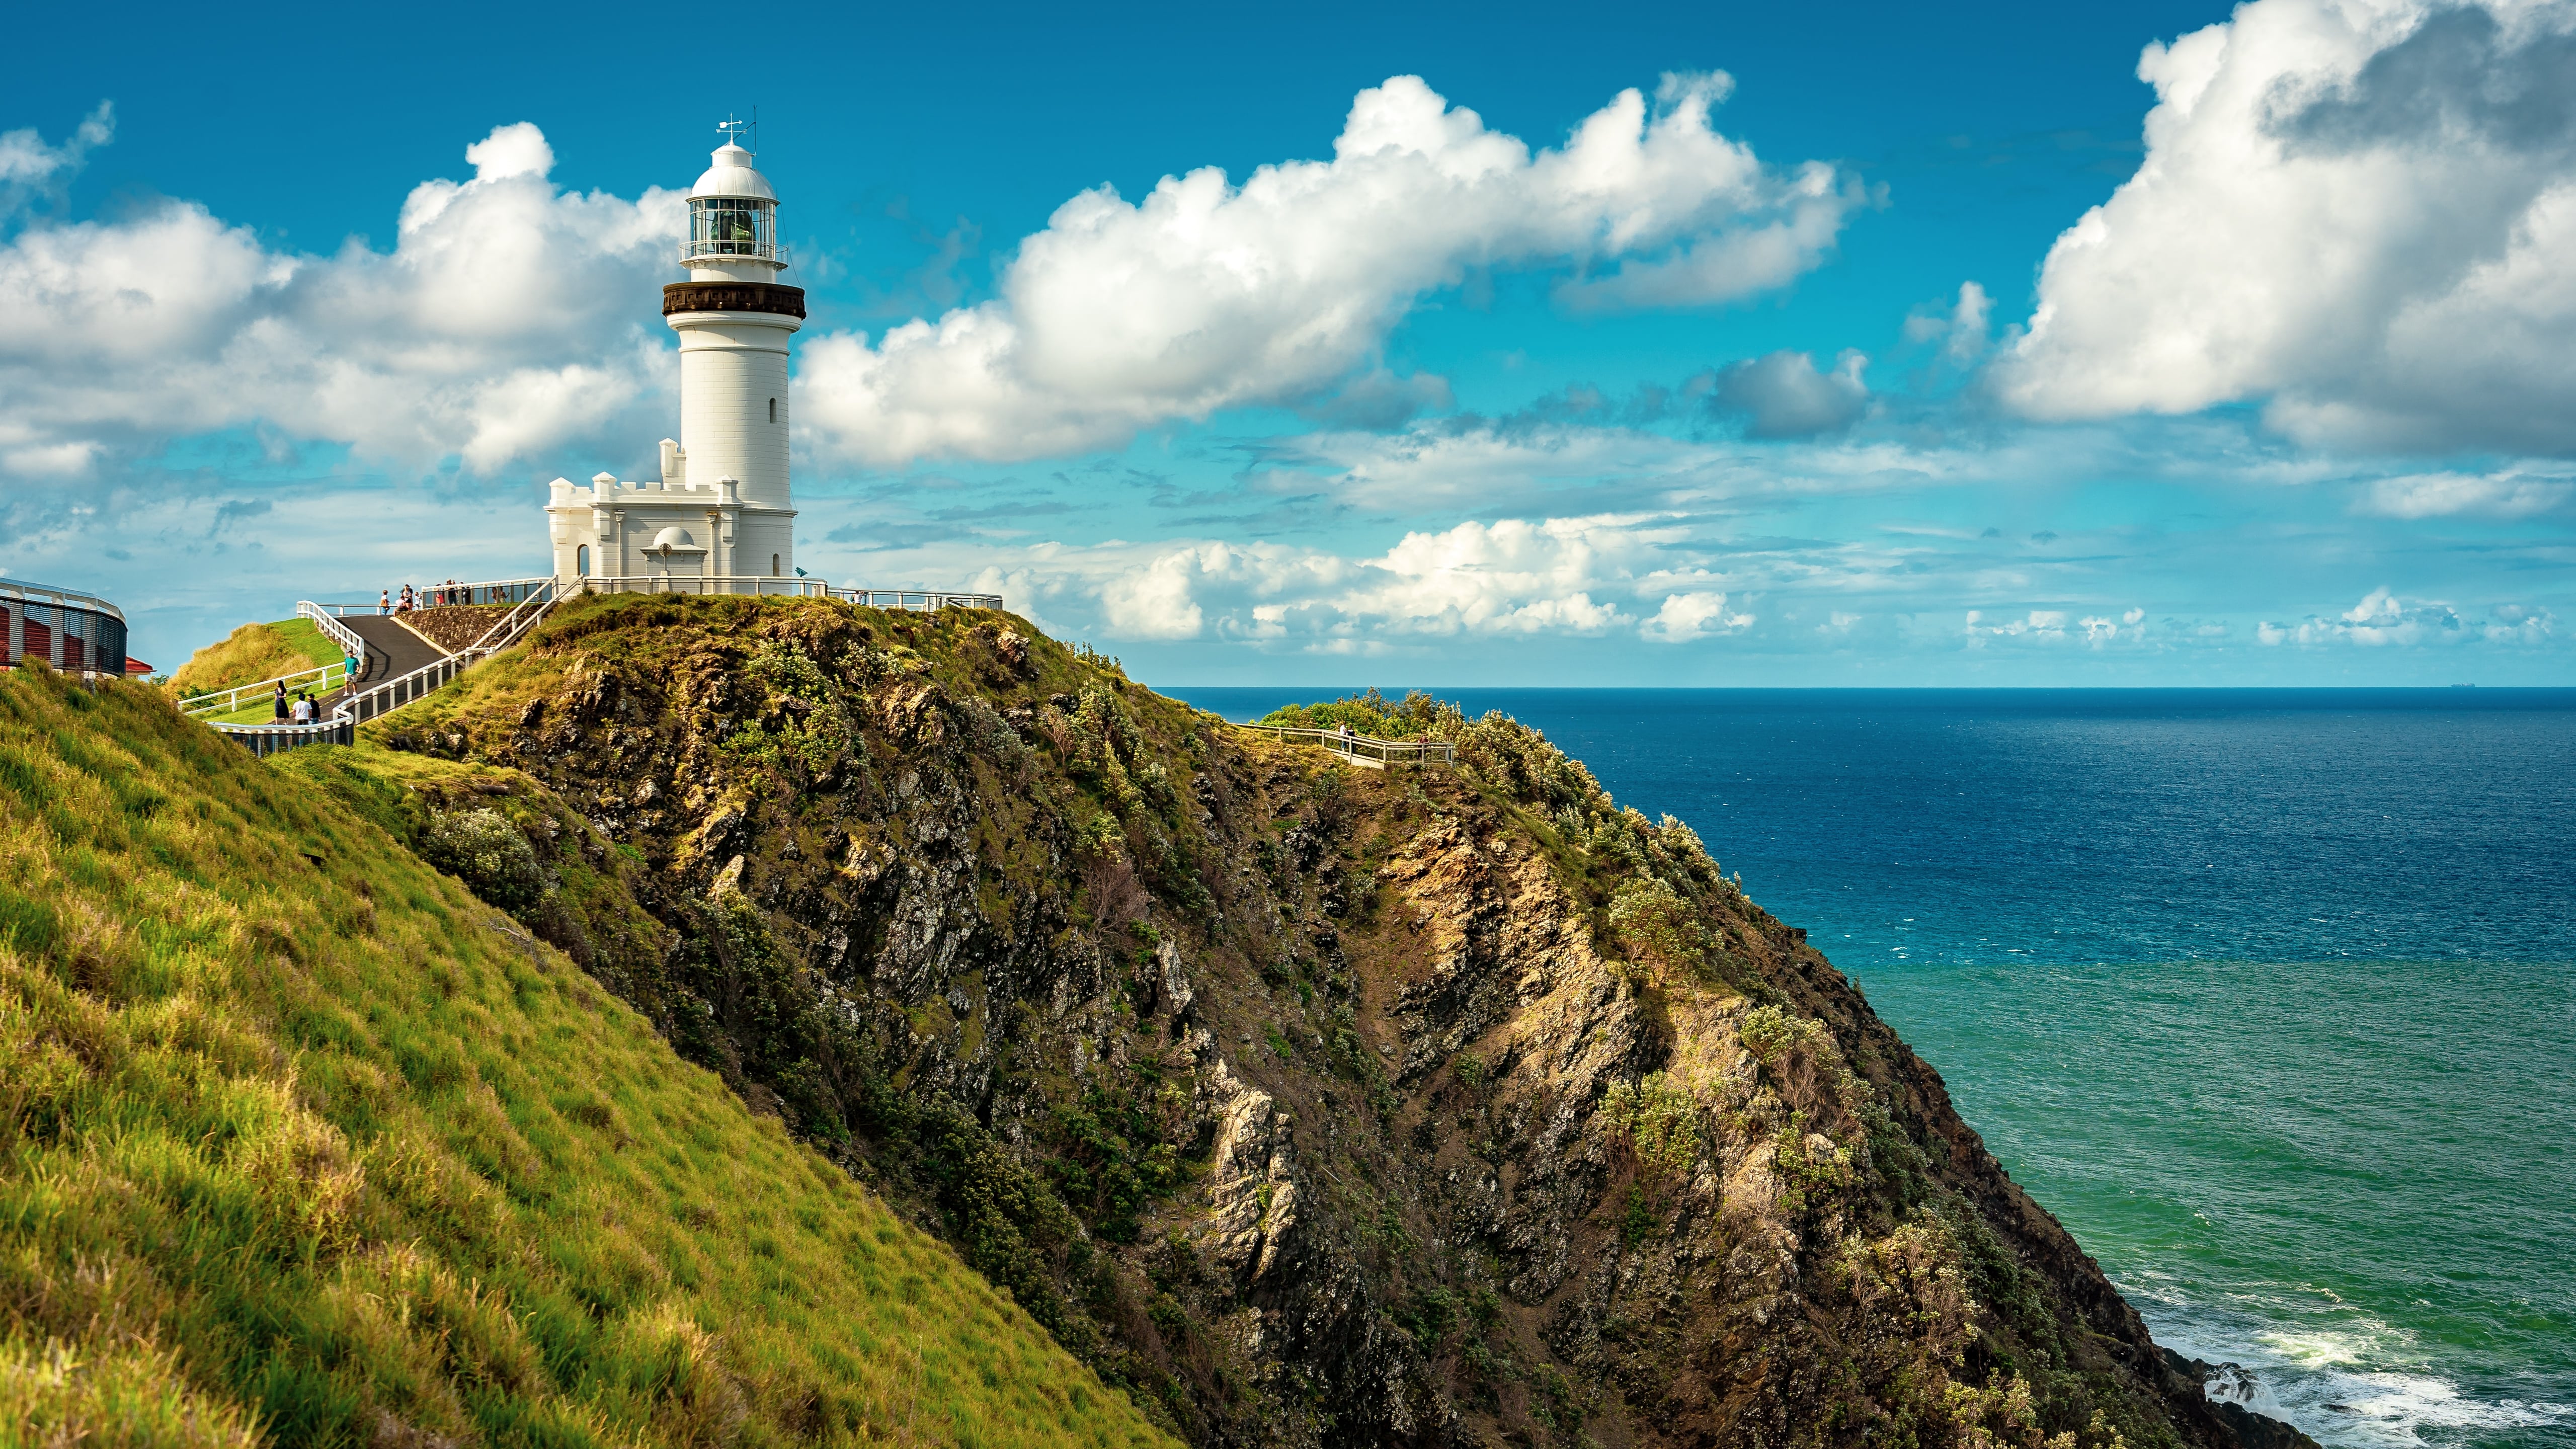 Lighthouse Beach in Byron Bay is a particular hotspot for whale watching